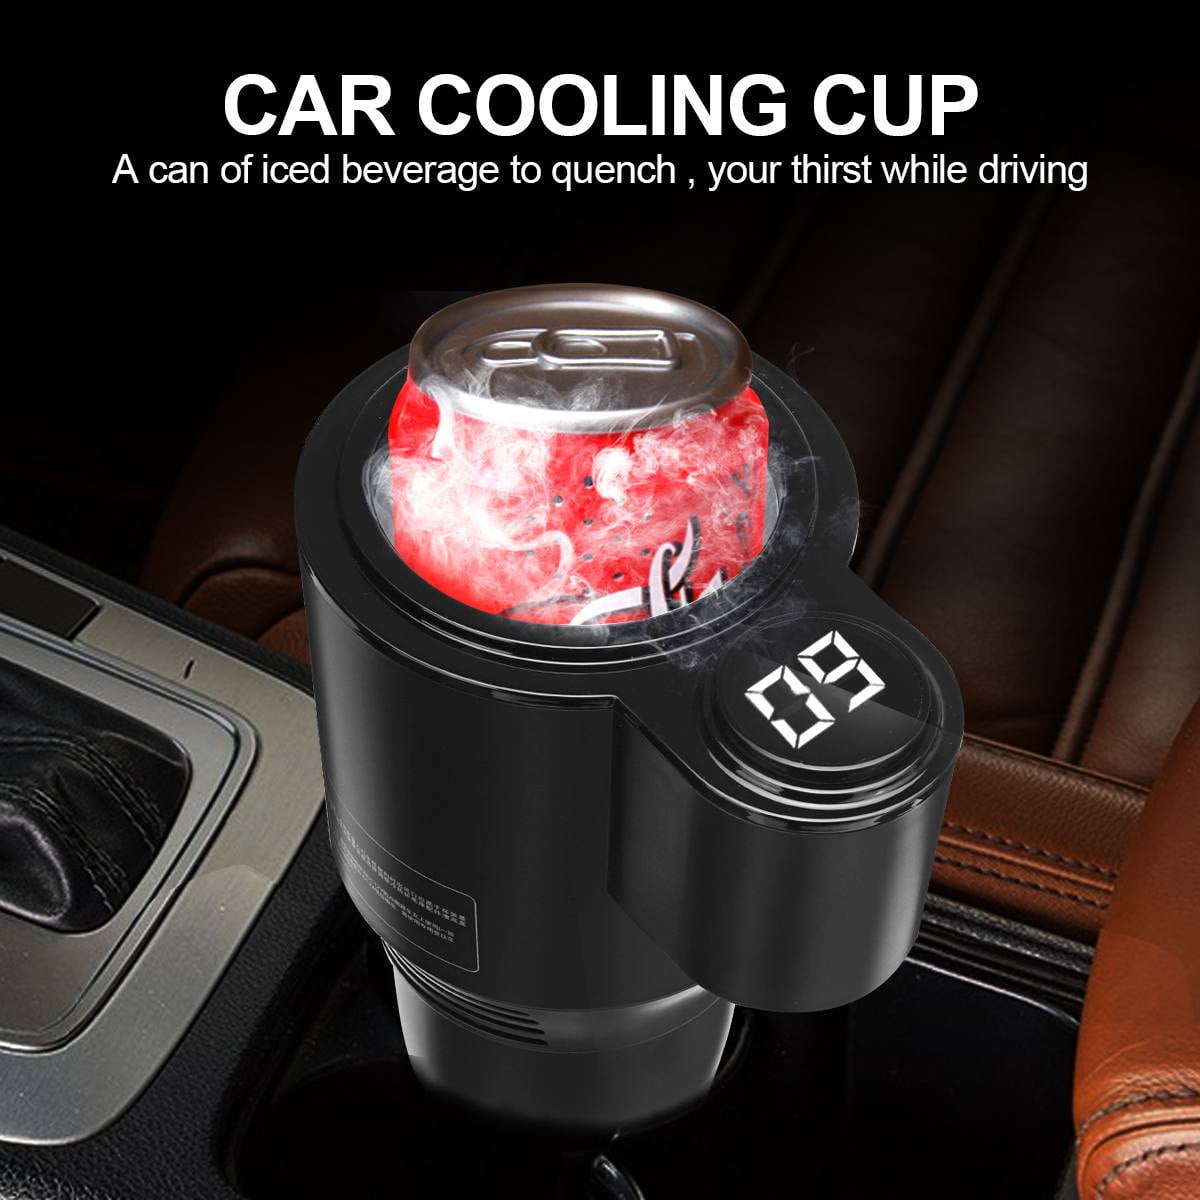 350ml Instant Cooling Cup Portable Cooling Cup Mini Electric Drink Cooler  Cup Car Home Office Instant